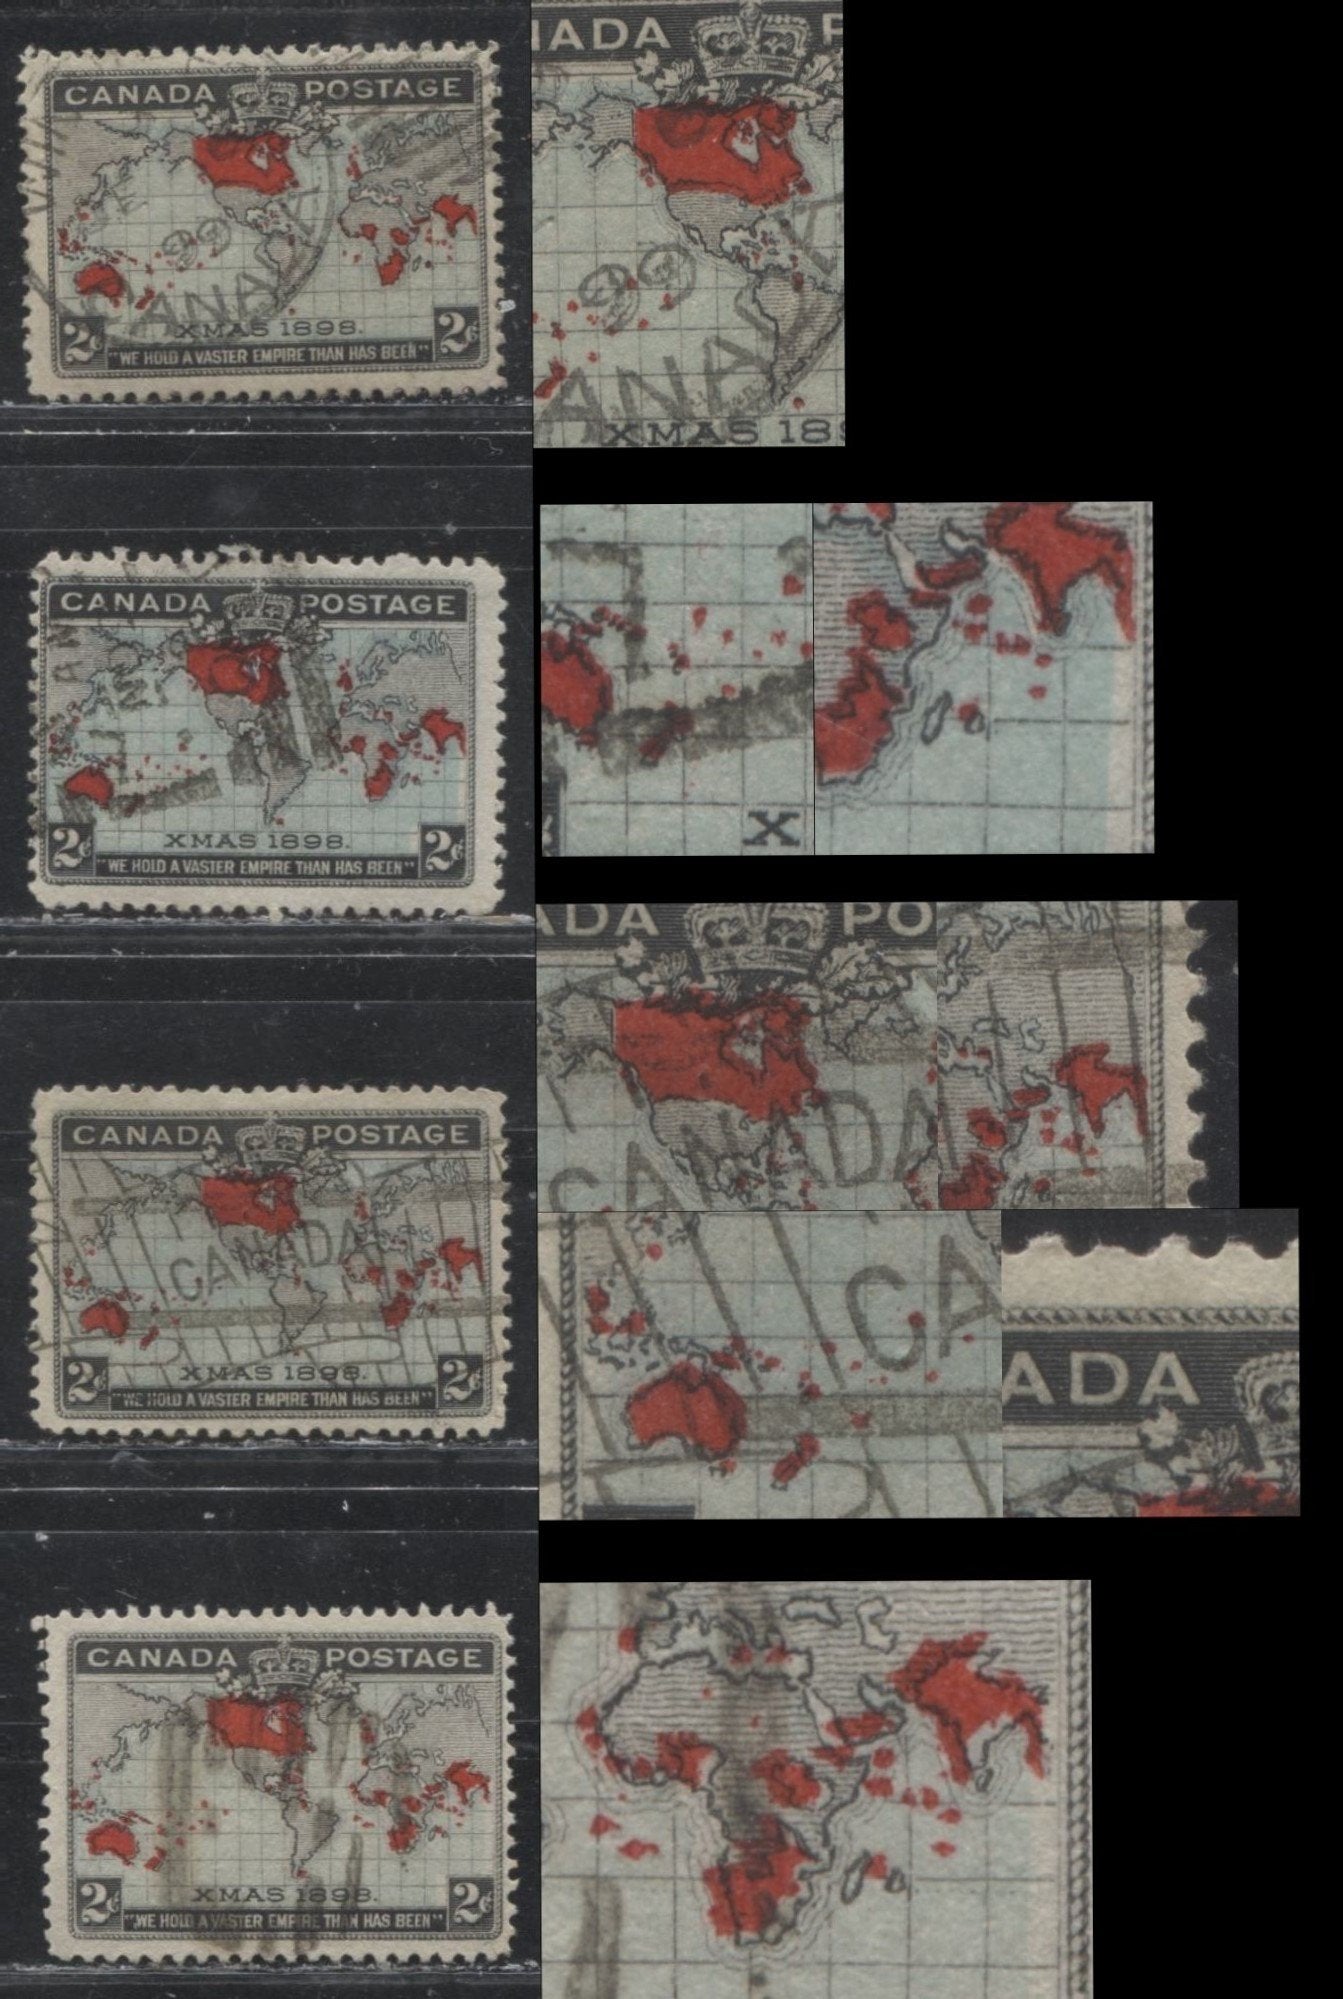 Lot 144 Canada #86 2c Greenish Blue, Black and Carmine Mercator's Projection, 1898 Imperial Penny Postage Issue, Fine Used Examples, All Showing Different Extra Islands Varieties